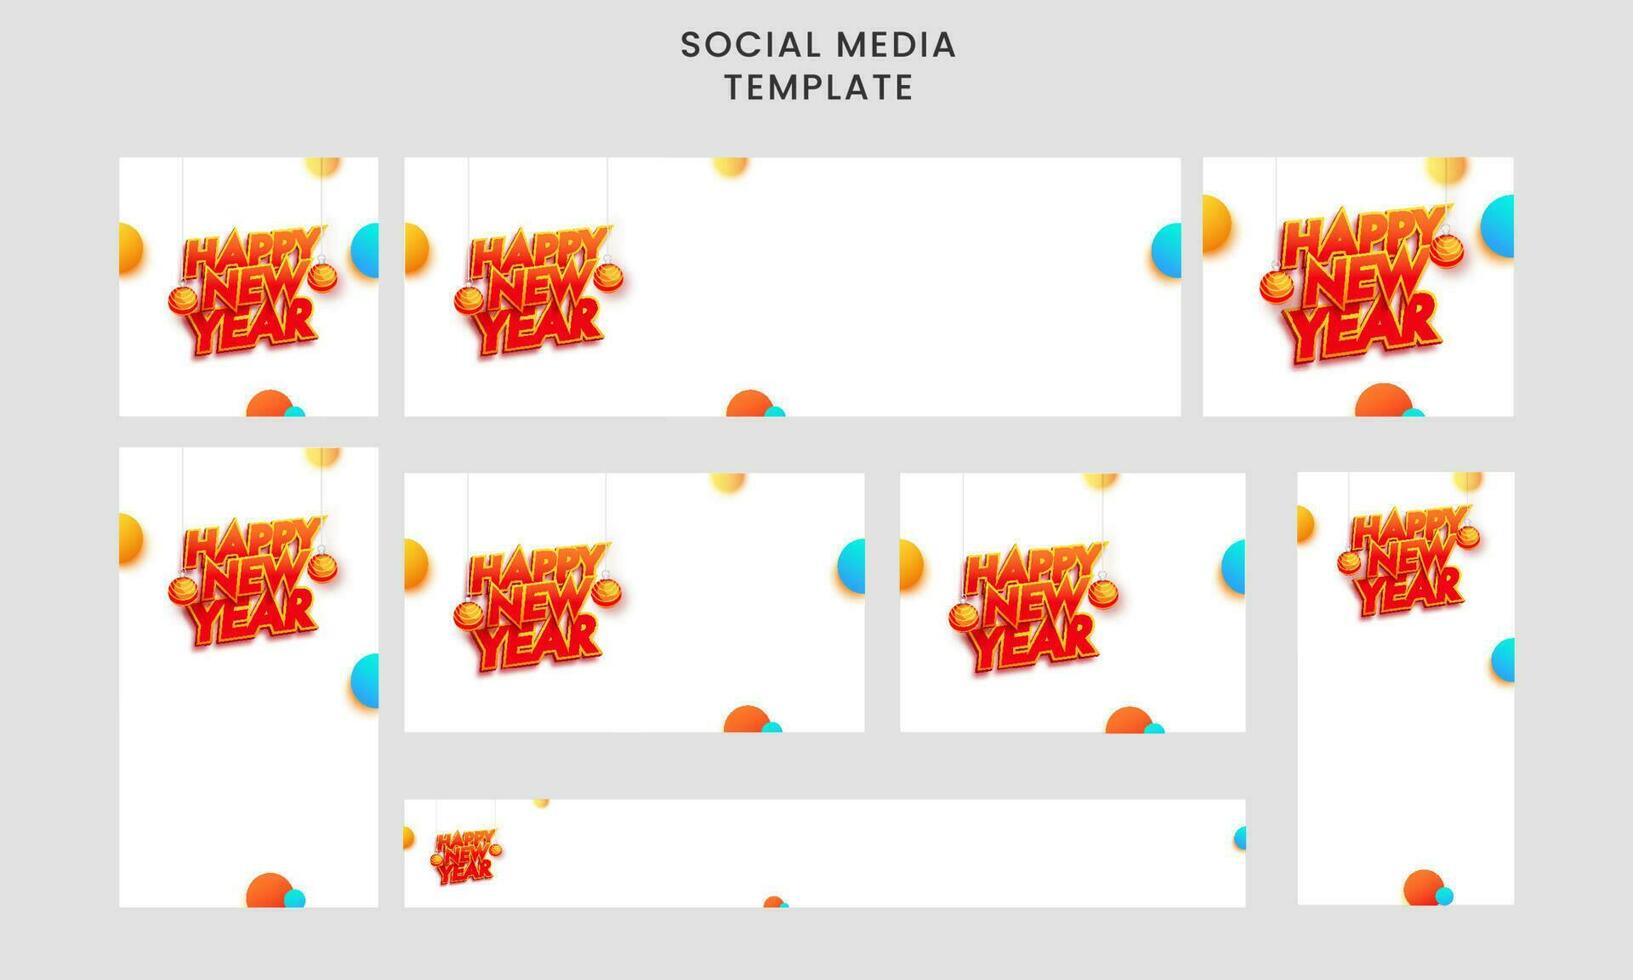 Set Of Social Media Template And Header Layout With Sticker Style Happy New Year Font And Baubles Hang On White Background. vector